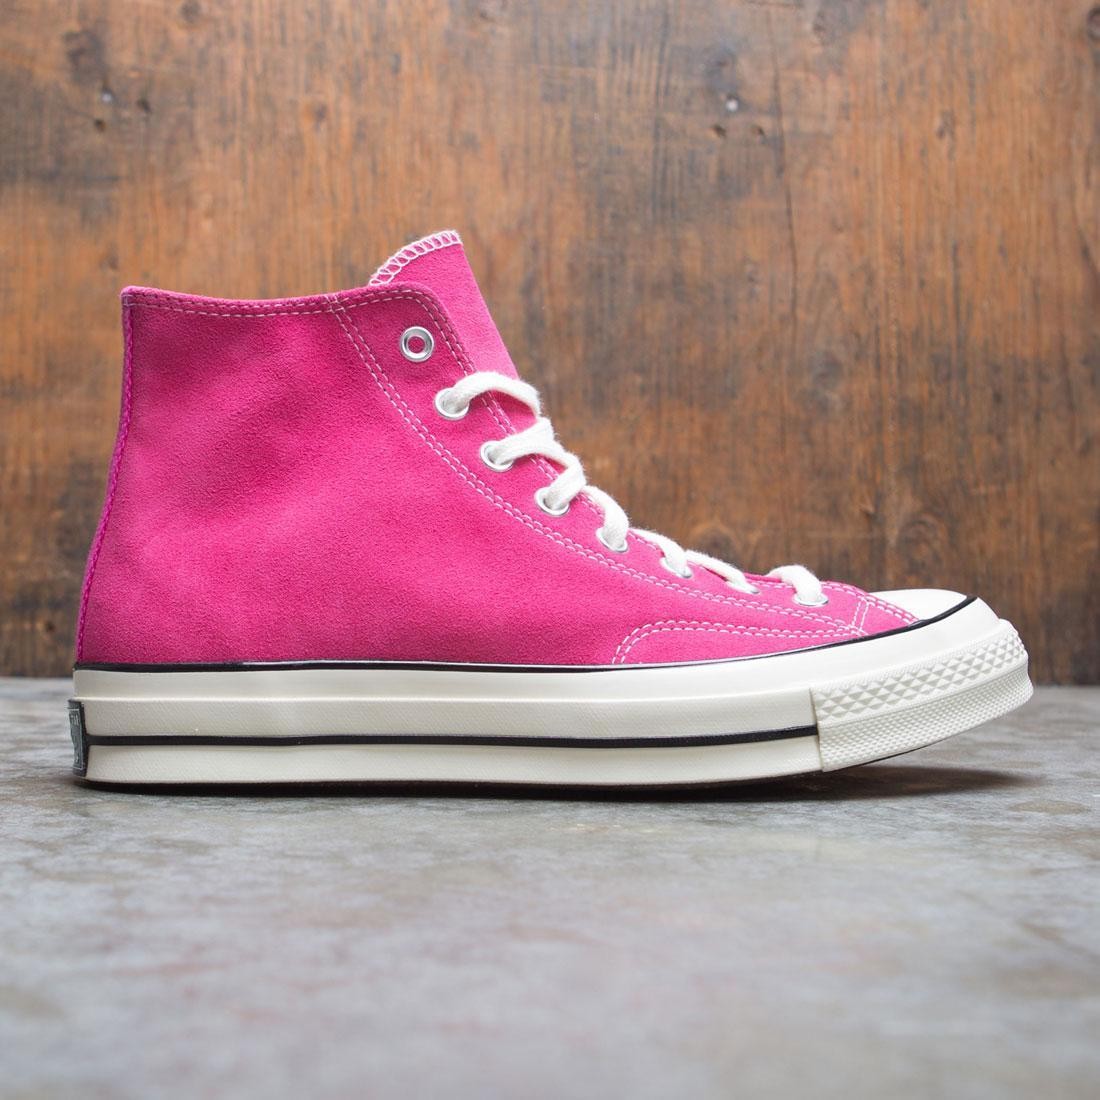 mens pink converse size 11